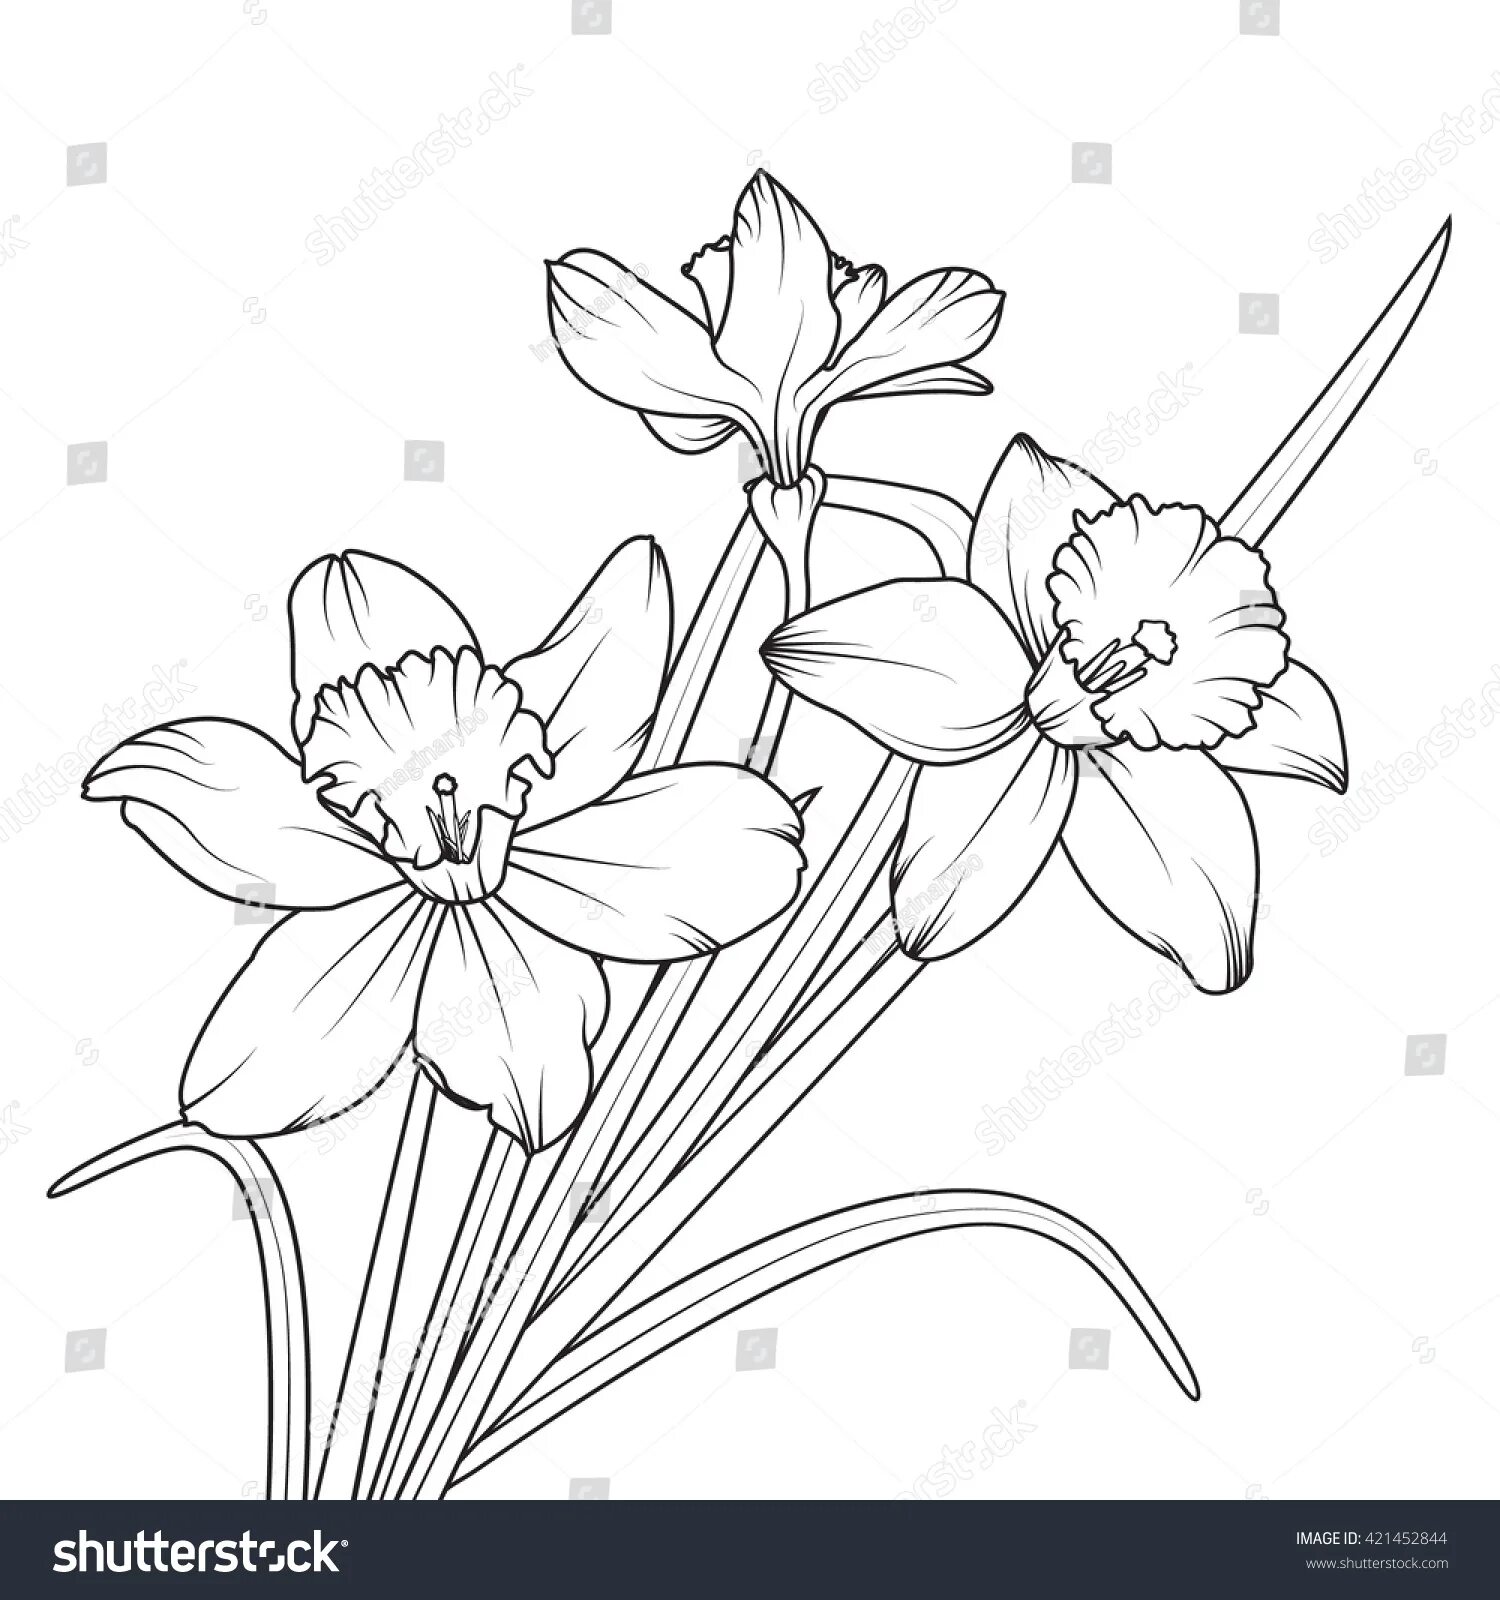 Coloring page hypnotic narcissus flower